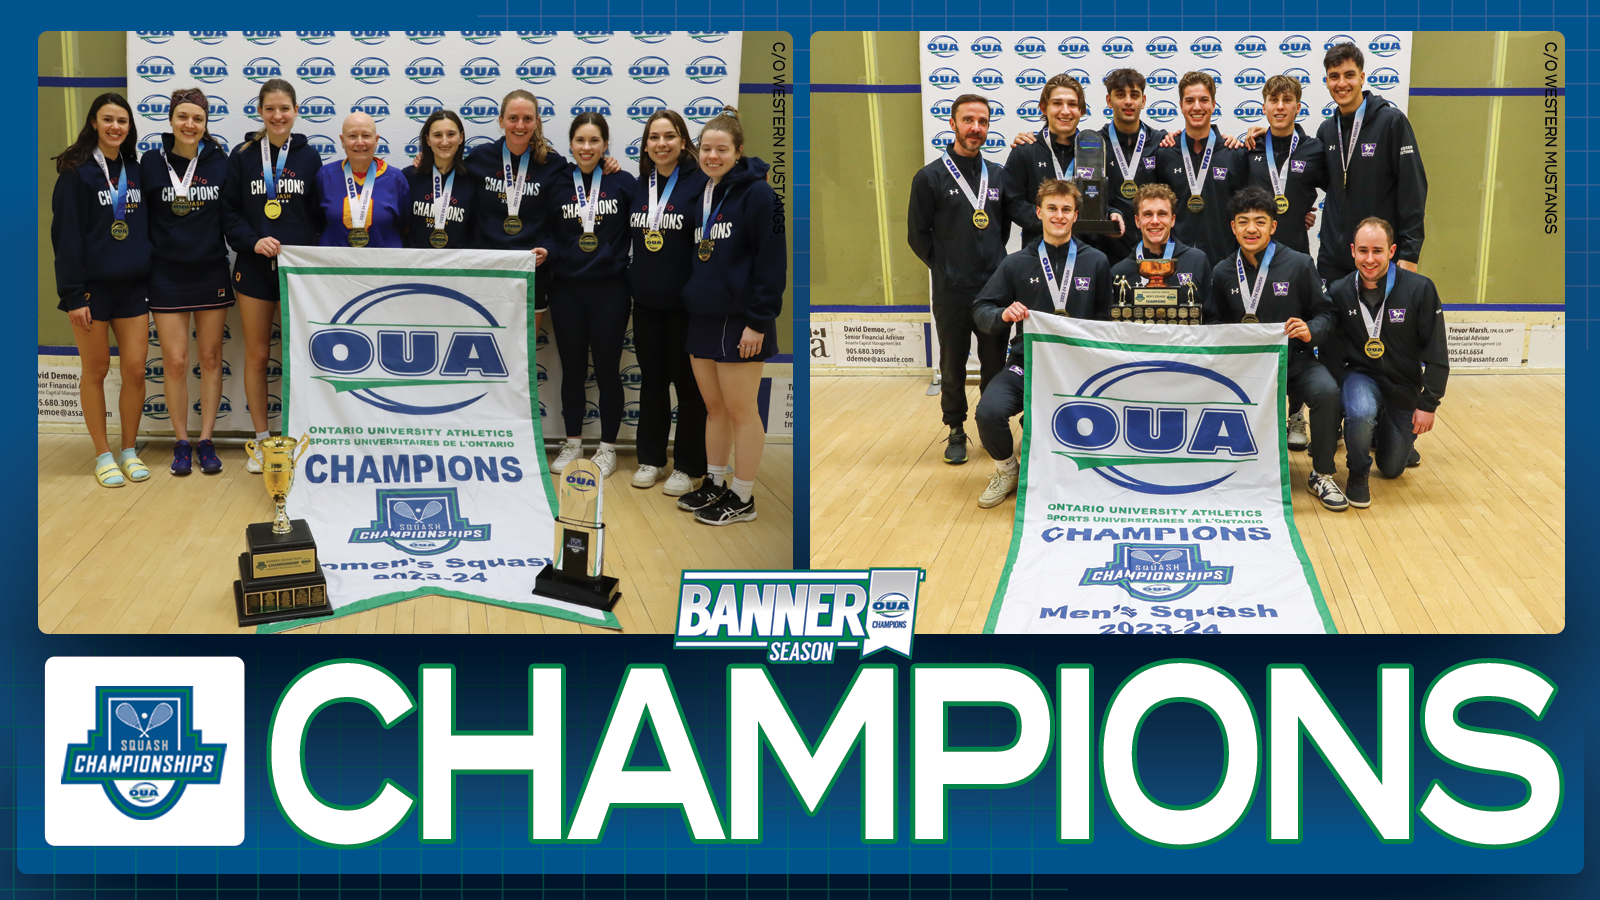 Graphic on predominantly blue background featuring banner photos of both the Queen's women's squash team and Western men's squash team, above large white text that reads, 'CHAMPIONS' and the OUA Squash Championships logo